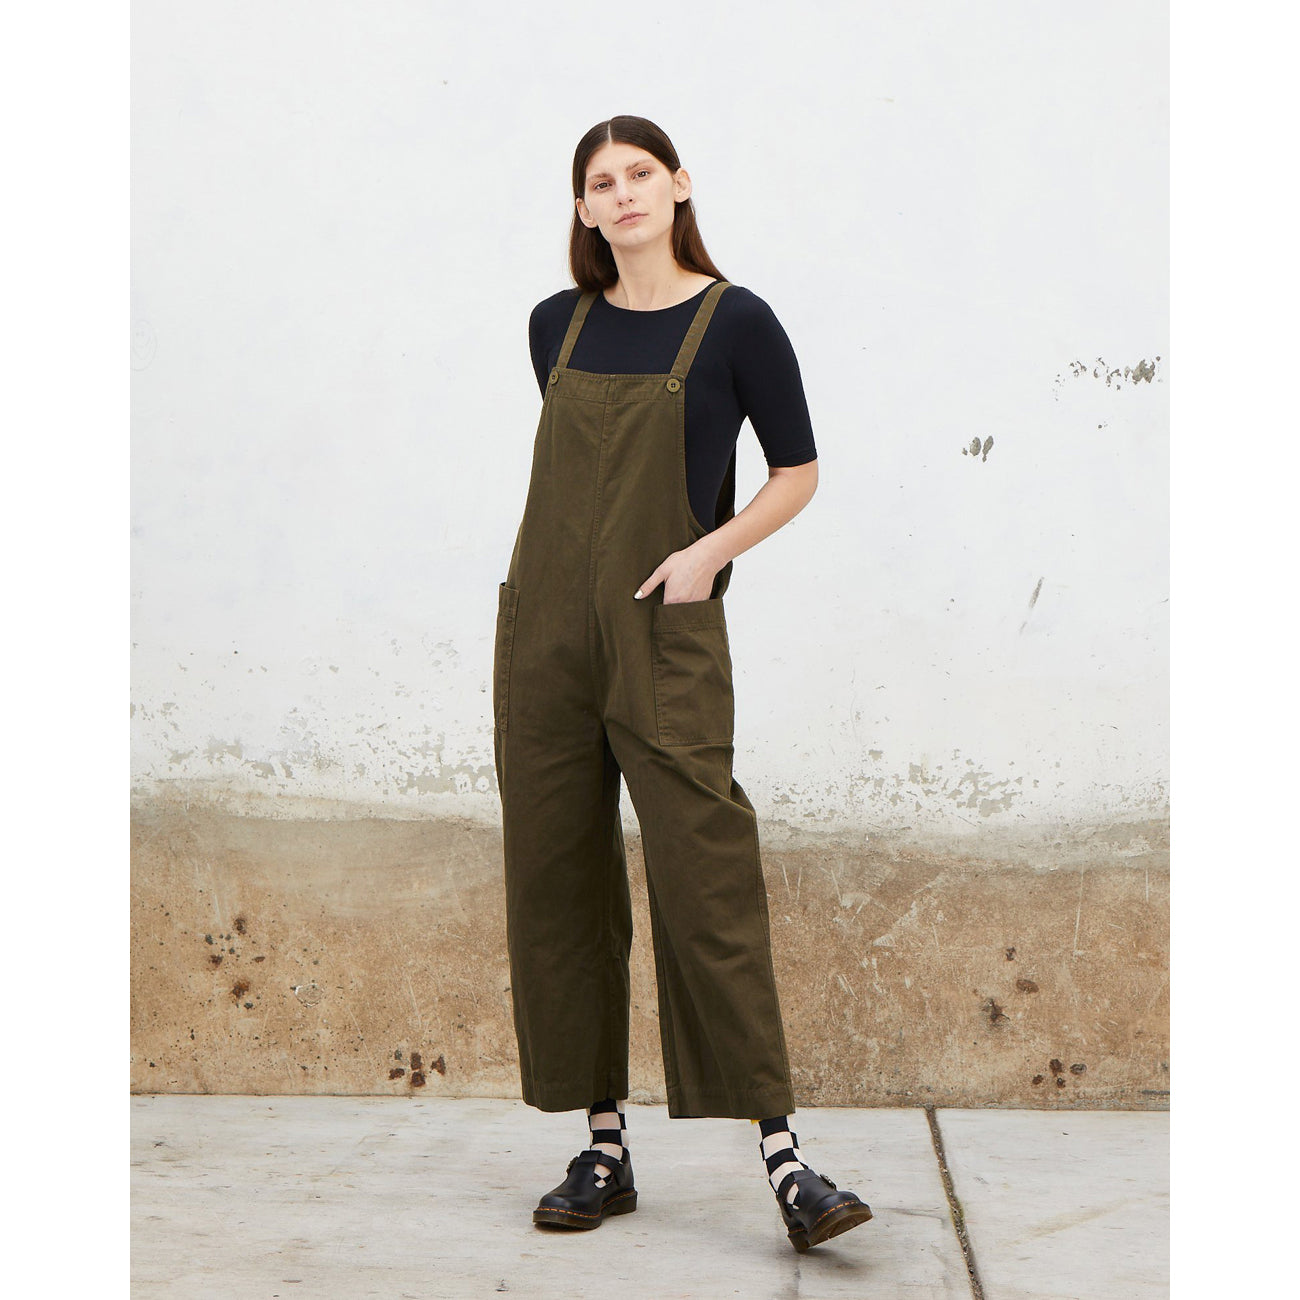 overall jumper in olive